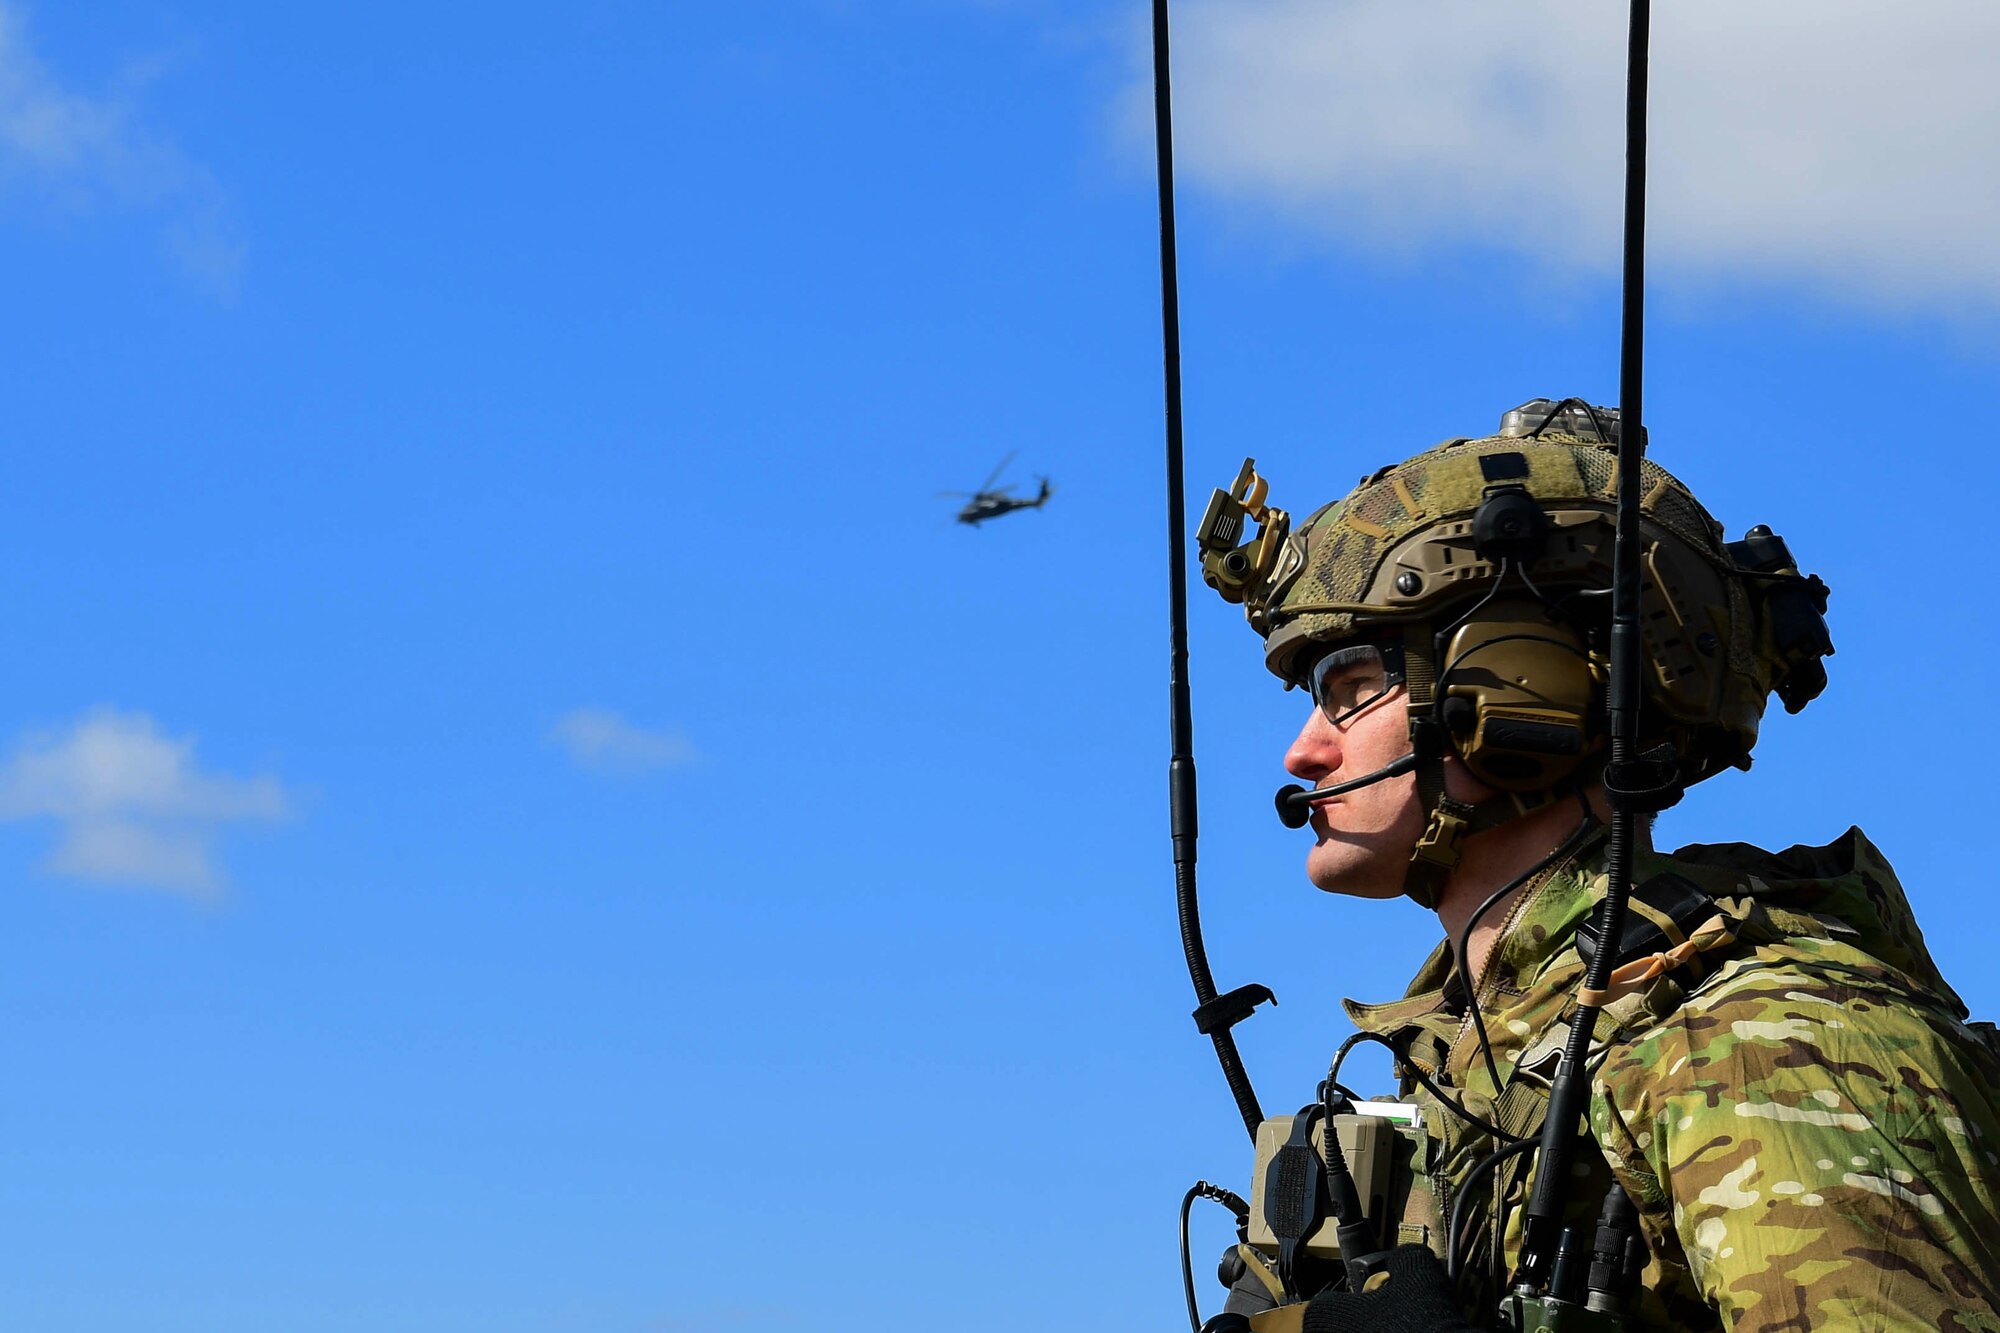 U.S. Air Force 1st Lt. Alexander Mount, 57th Rescue Squadron combat rescue officer, waits for an HH-60G Pave Hawk assigned to the 56th RQS to land in Romania, March 9, 2022. The 57th RQS and the 56th RQS alongside the Royal Marines Commando Mobile Air Operations team with Commando Helicopter Force provided training on how to safely operate around a helicopter to the 51st Commando Battalion Romanian Special Forces. (U.S. Air Force Photo by Senior Airman Noah Sudolcan)